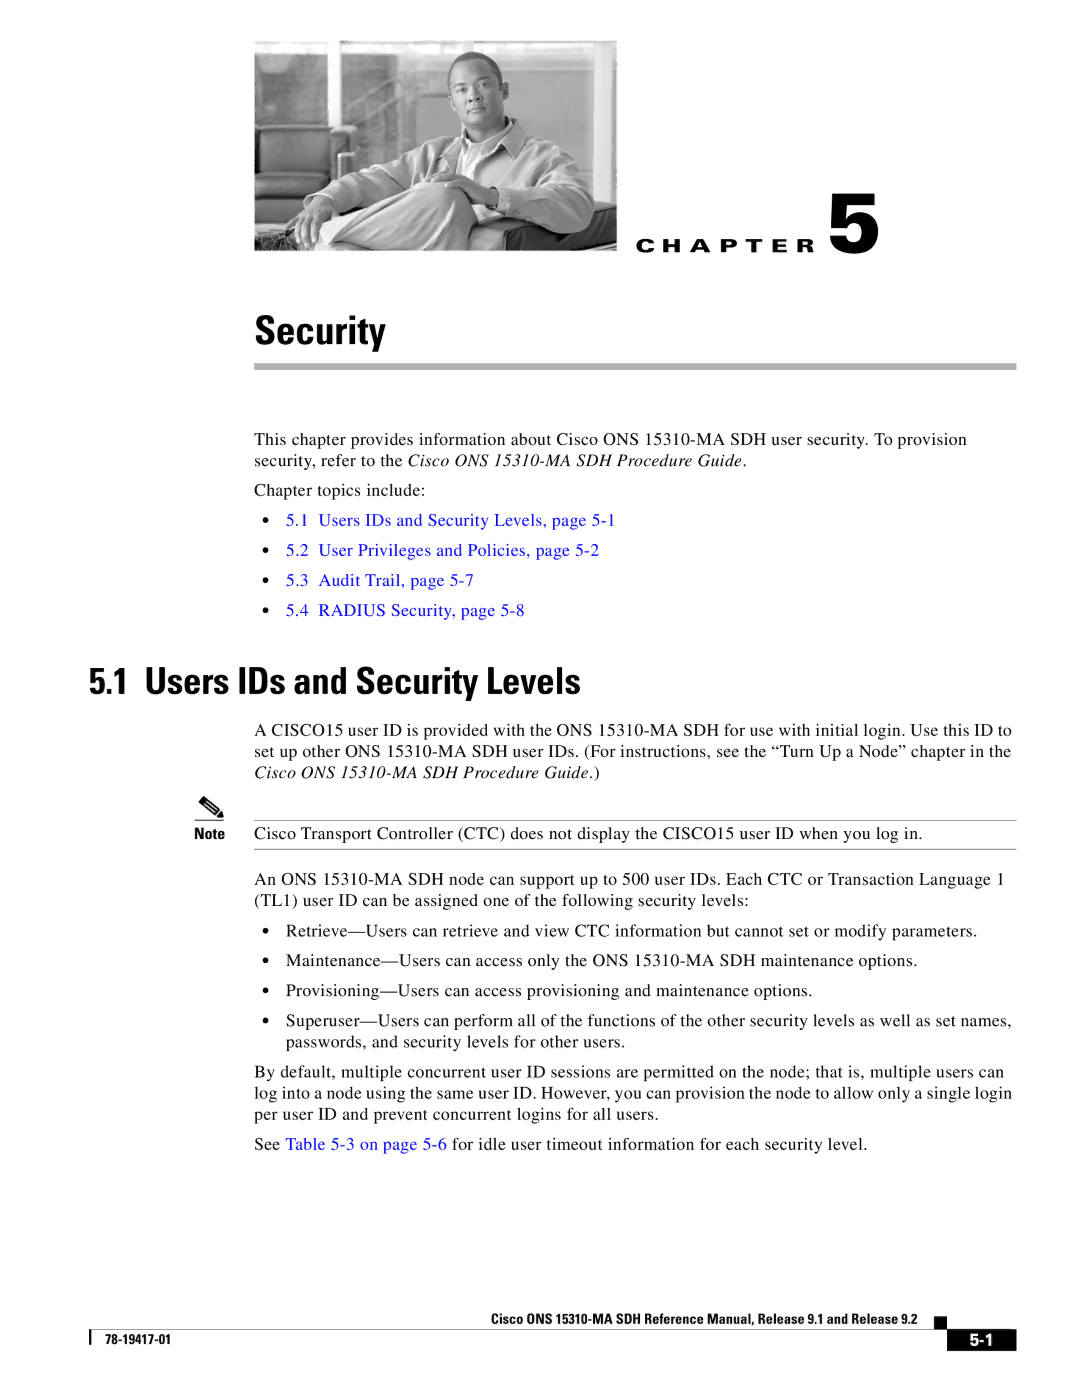 Cisco Systems 15310-MA manual Users IDs and Security Levels 